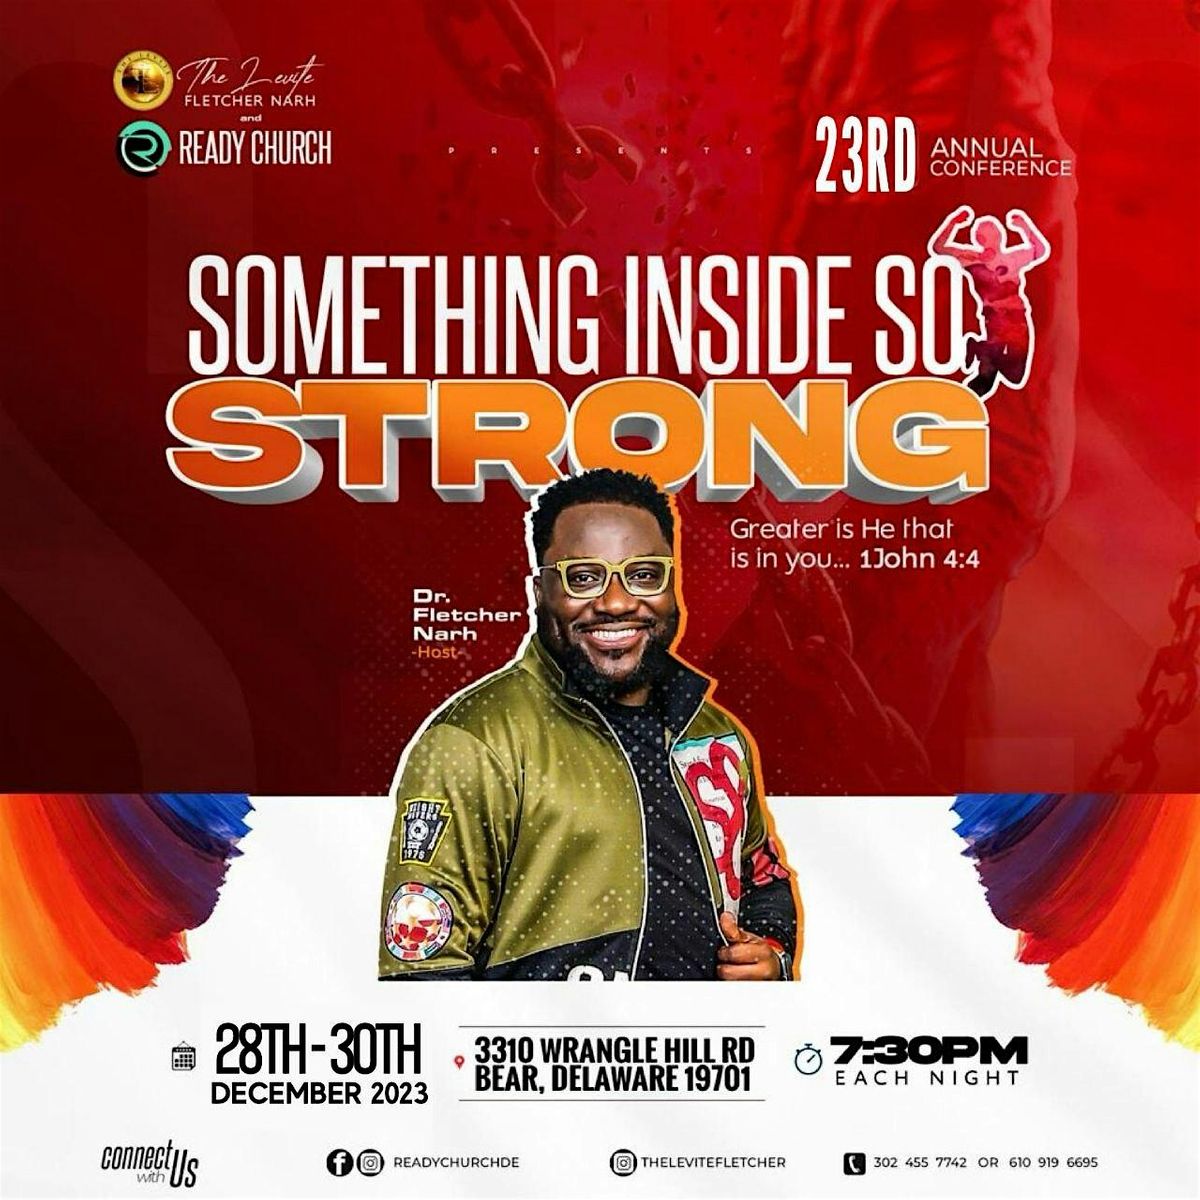 Something Inside So Strong: Unleashing Greatness